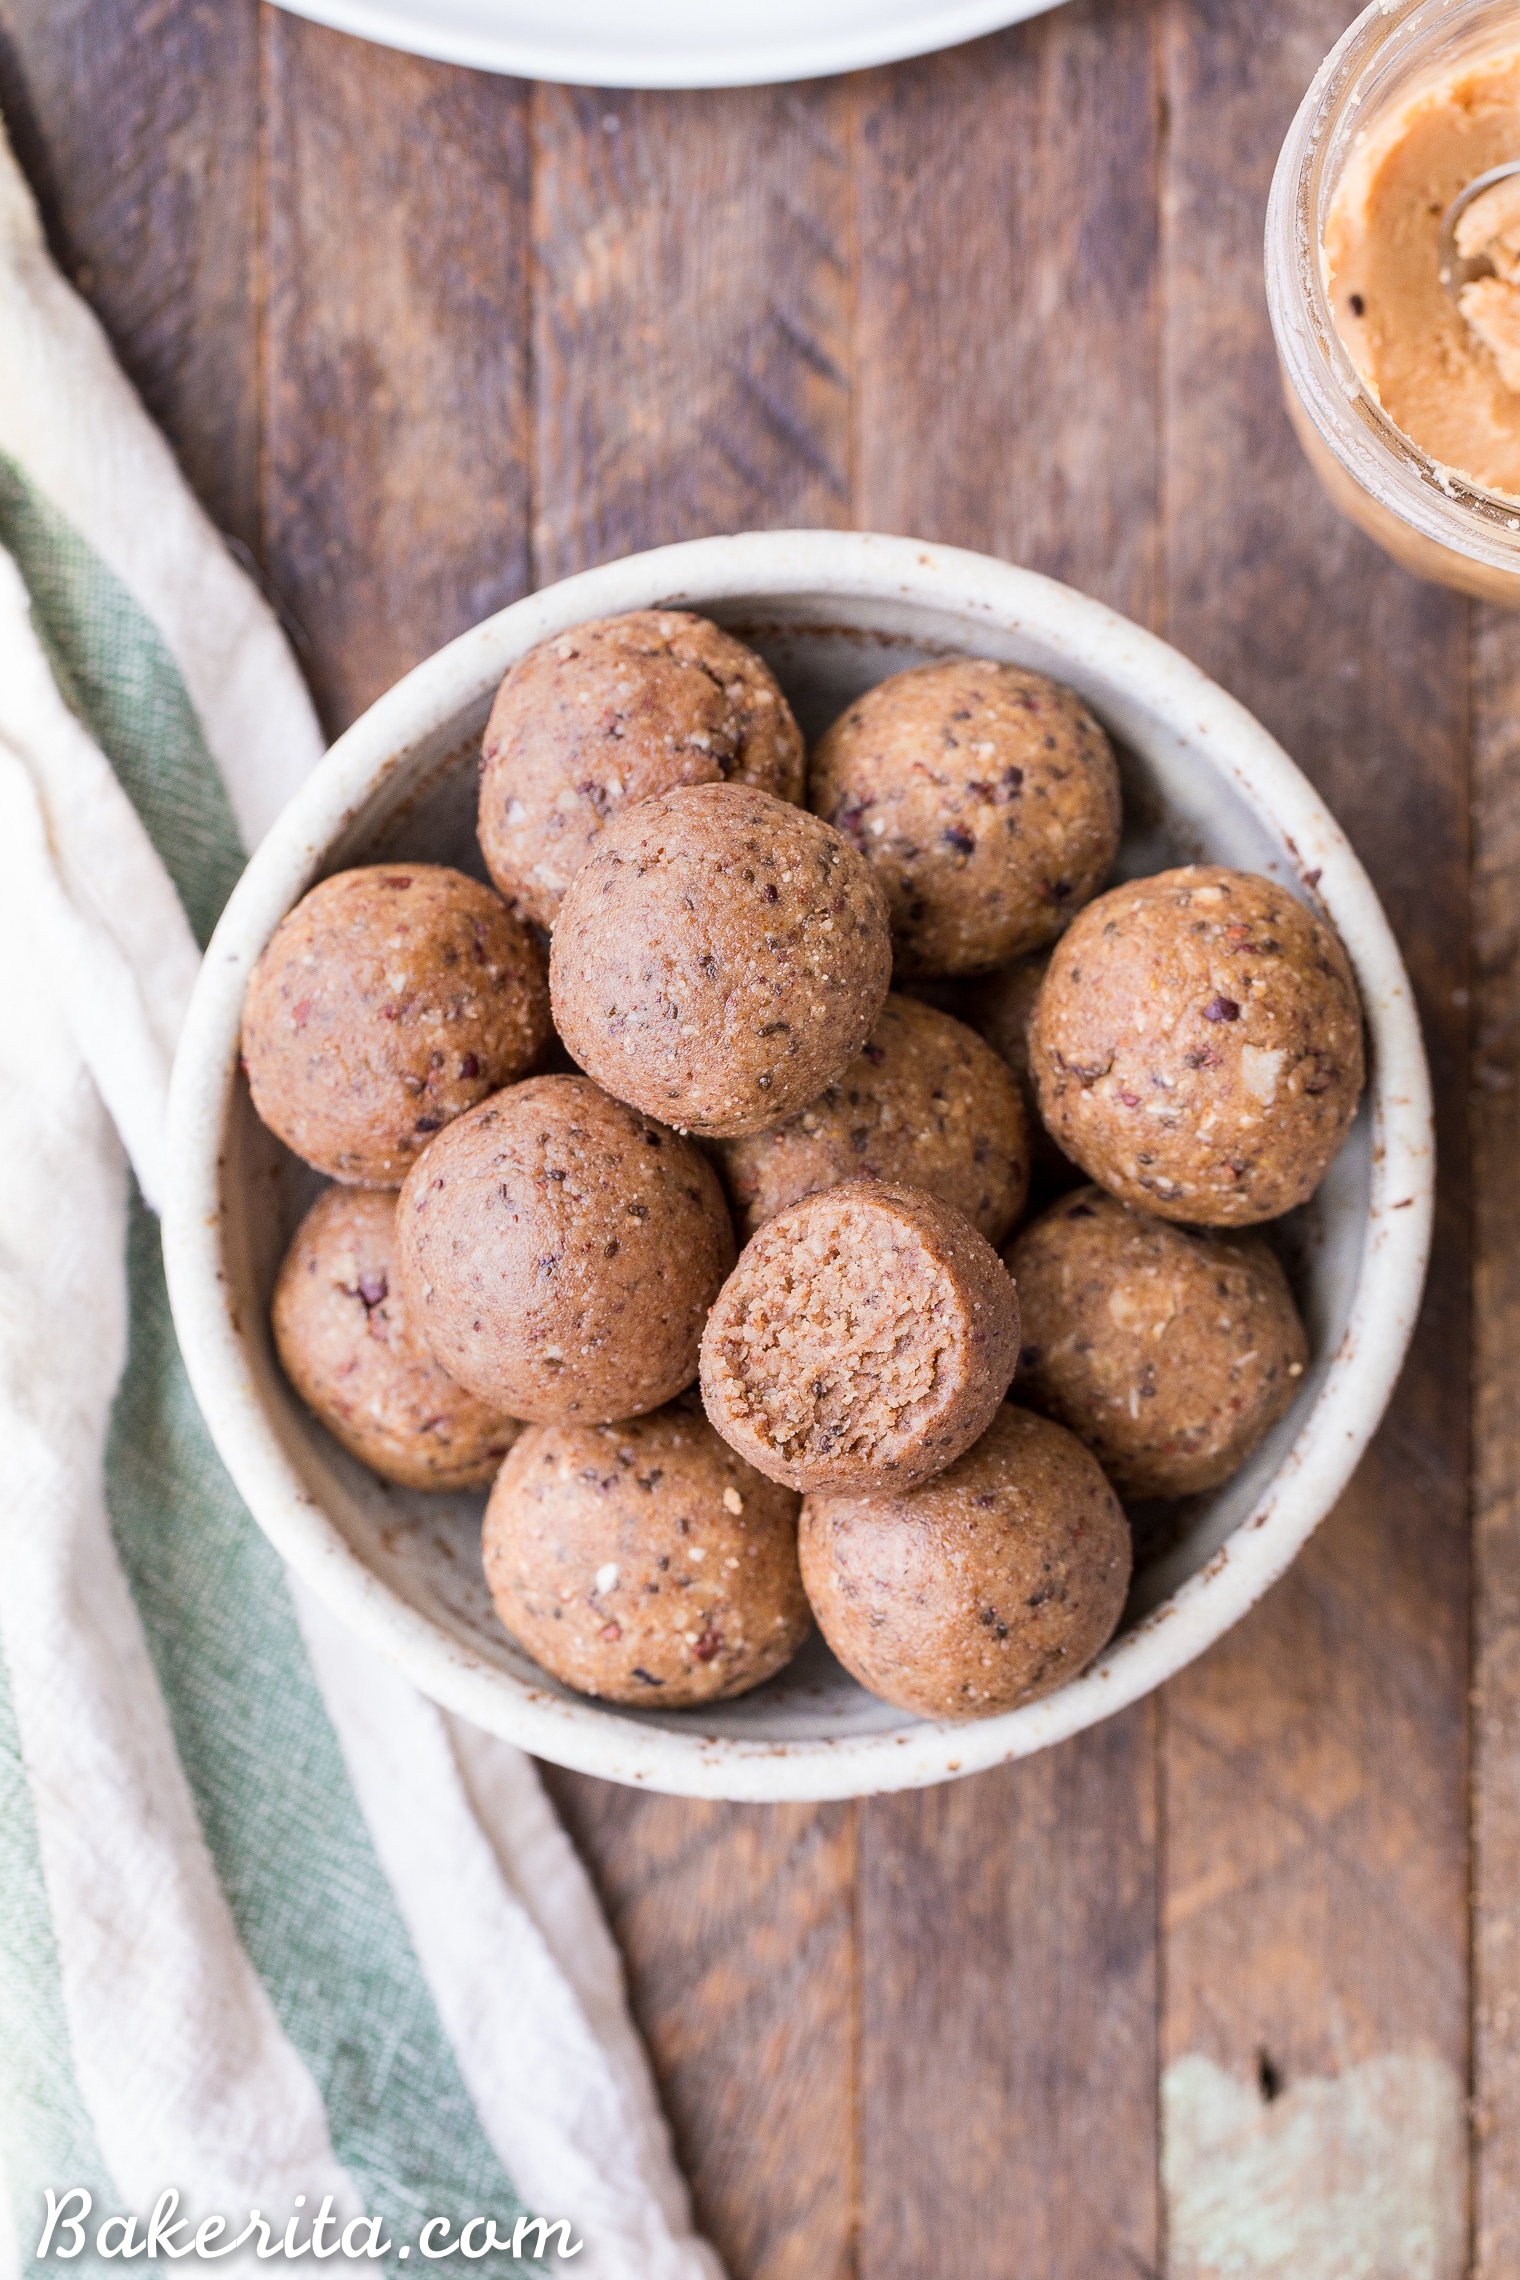 These Nutty Coconut Fat Bombs are an easy-to-make snack that is filling, full of healthy fats, and absolutely delicious! It's a no-bake recipe that's gluten-free, paleo, keto, low carb, Whole30-friendly, and vegan. 